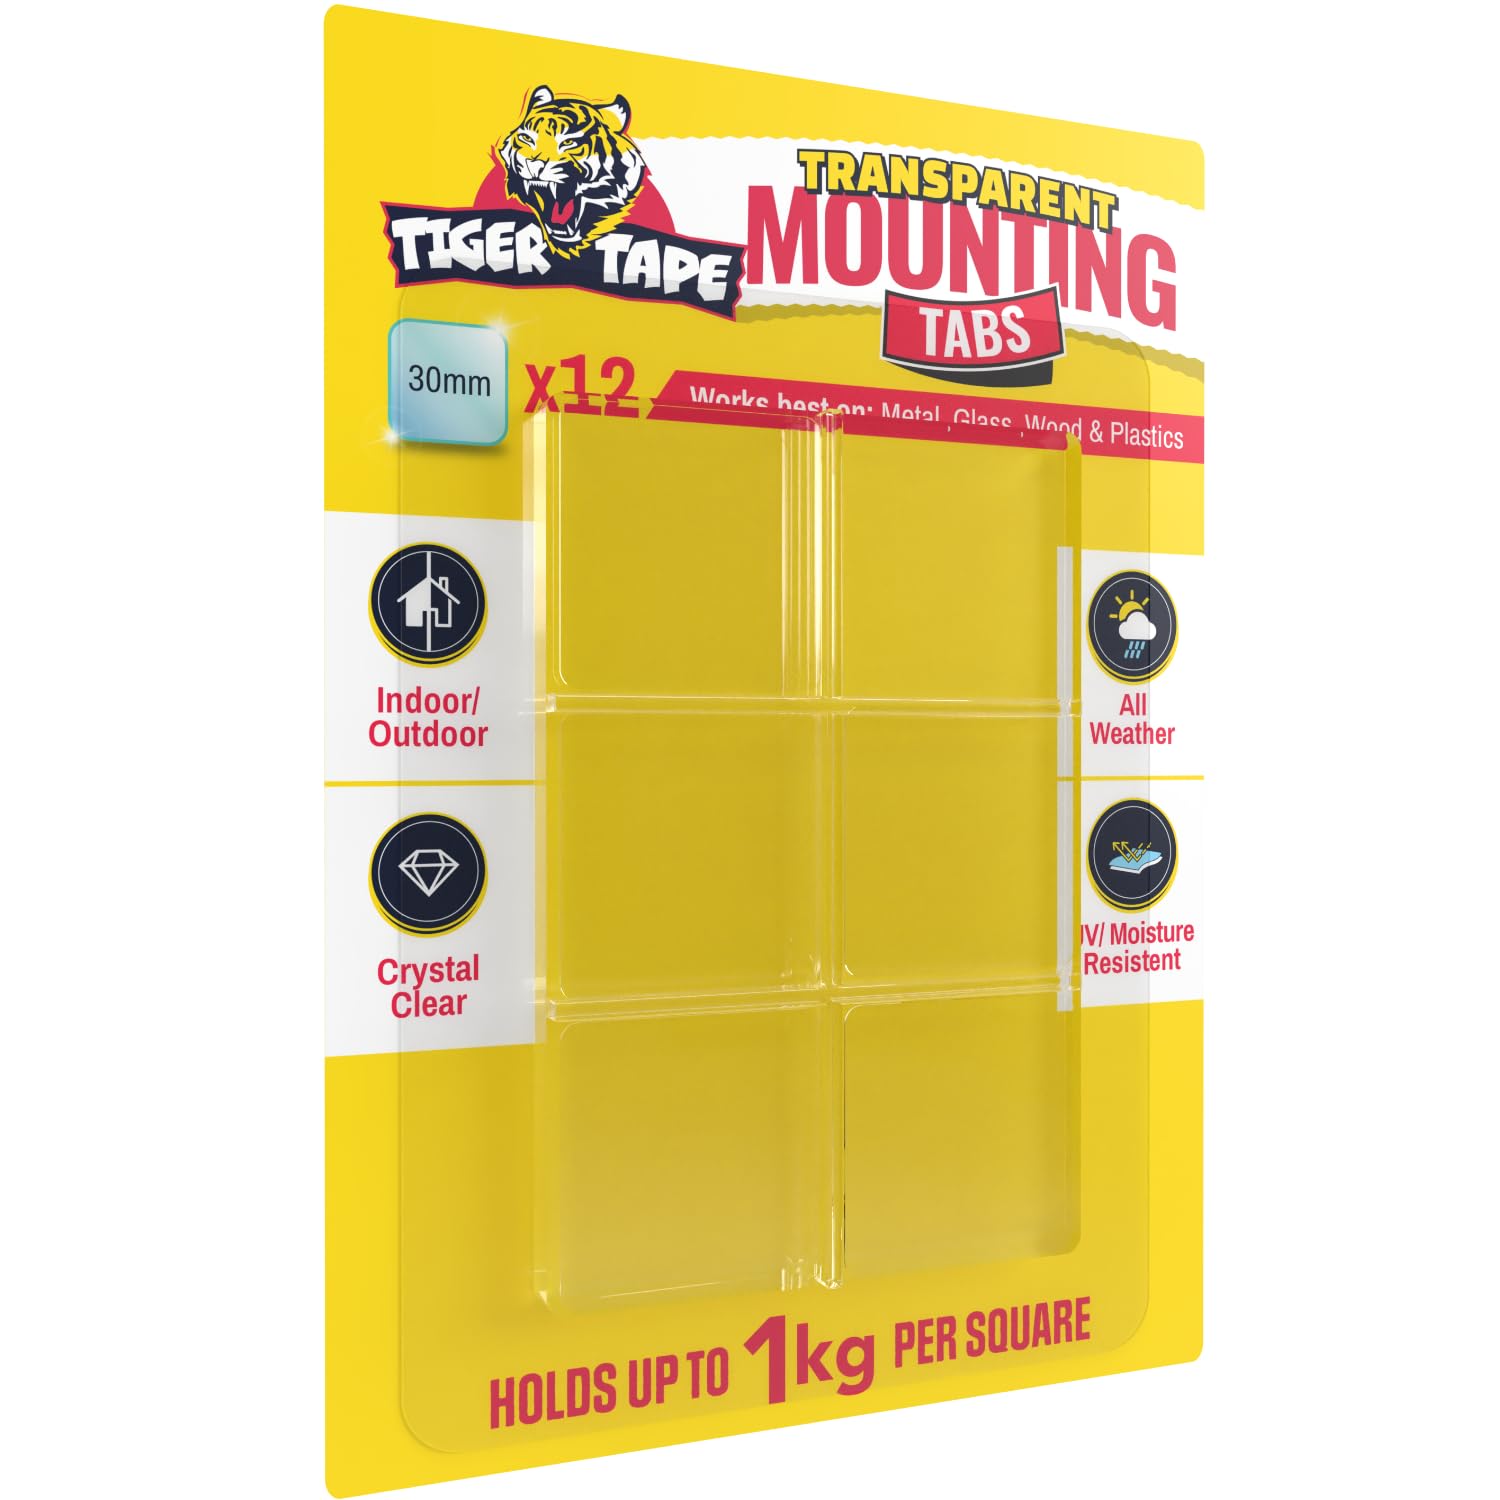 Tiger Tape Double Sided Mounting Tabs | Easy Mounting Pre Cut Squares for DIY and professionals | Clear, Strong, Airtight and Waterproof (Pack of 12) 30mm squared